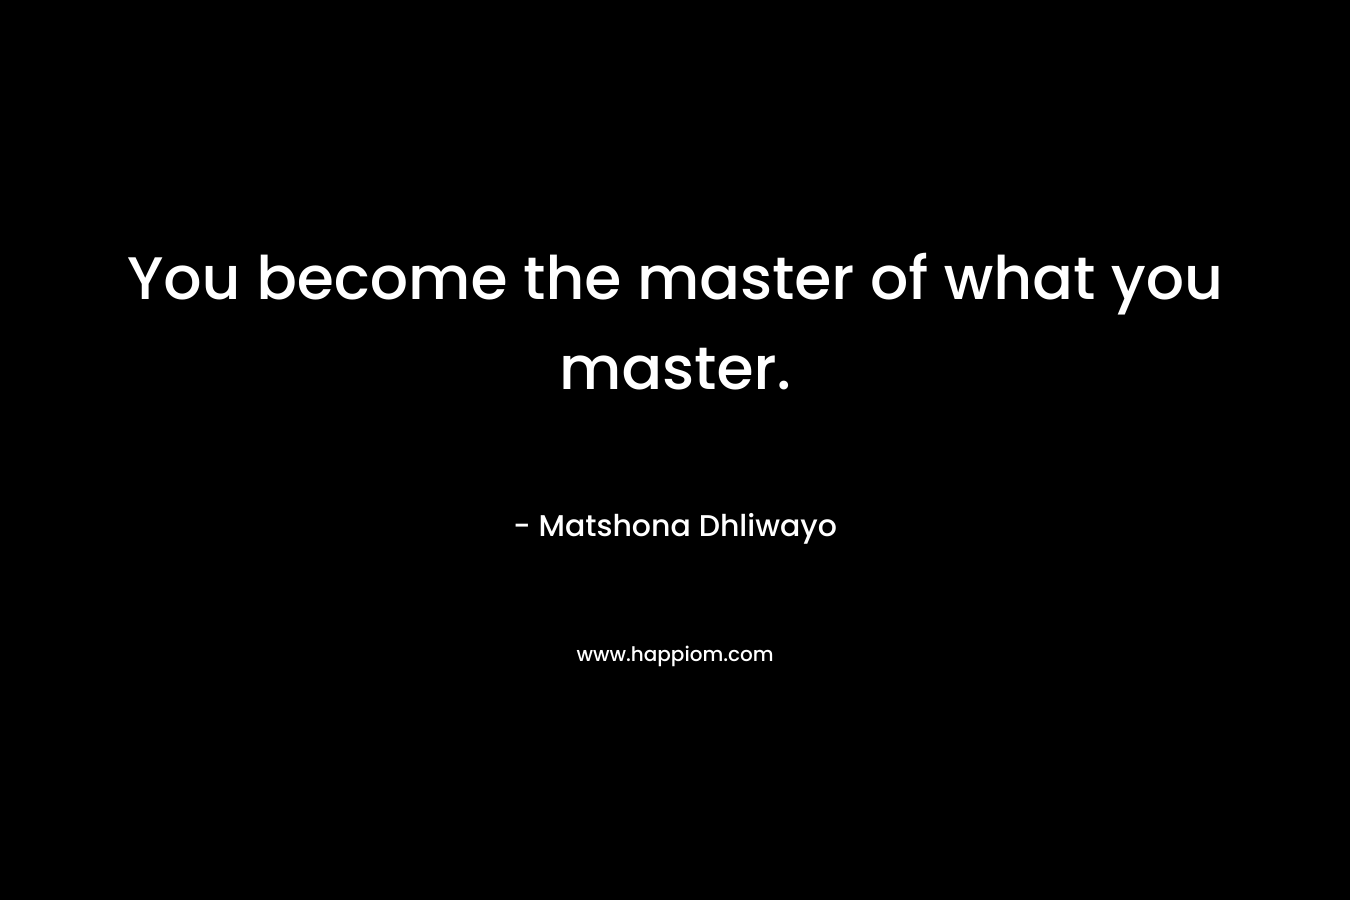 You become the master of what you master.